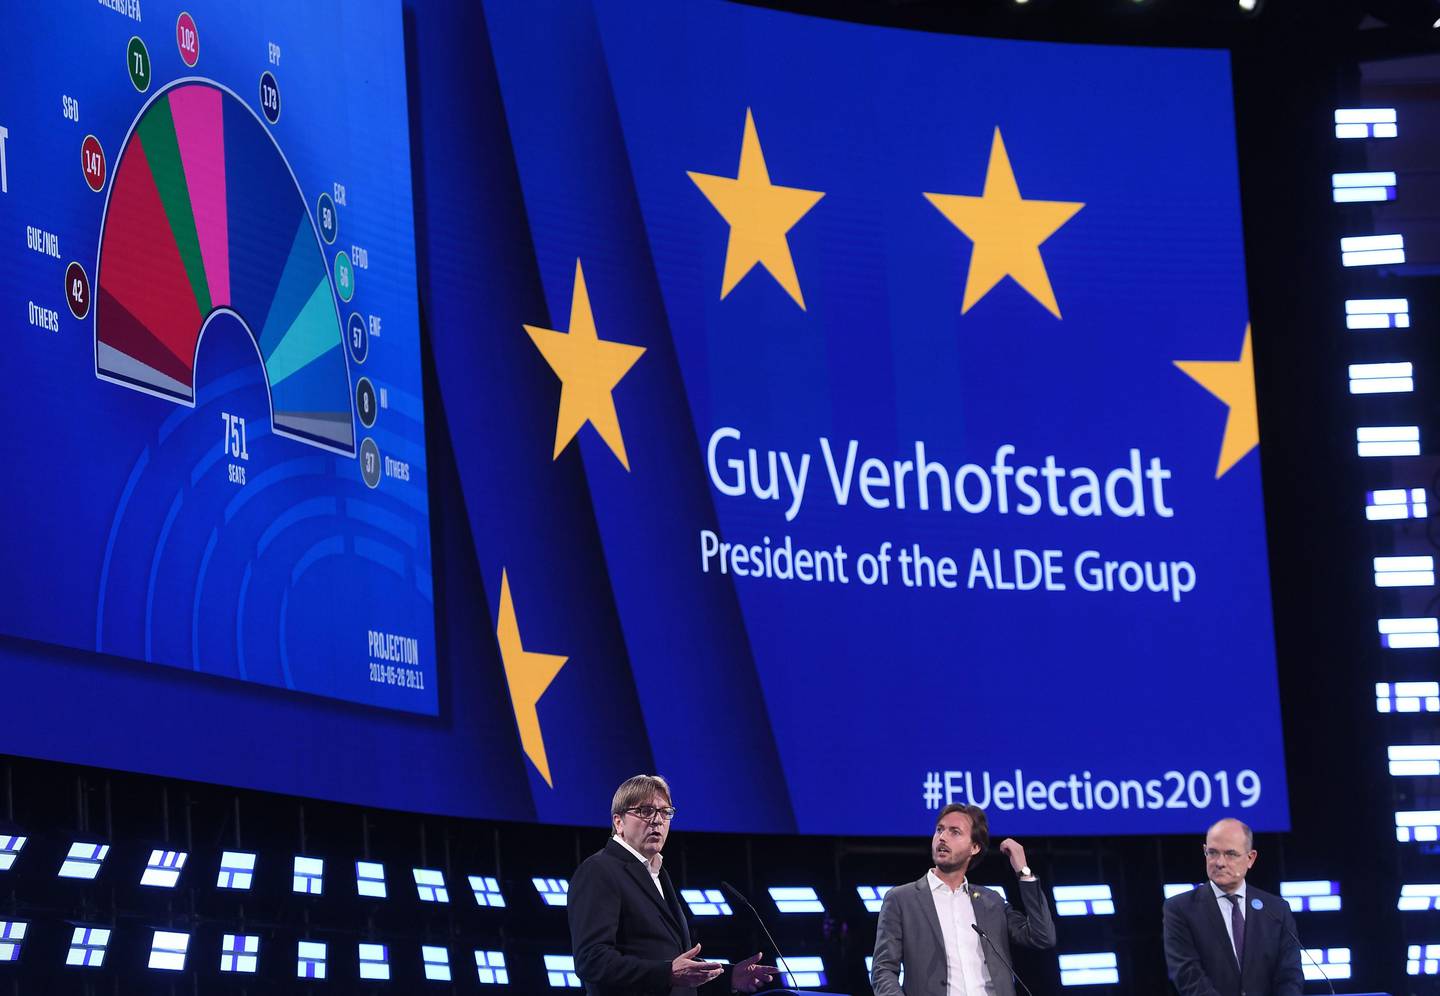 Guy Verhofstadt (L), leader of the Alliance of Liberals and Democrats for Europe (ALDE) gives a speech inside the hemicycle of the European Parliament during the European elections results night in Brussels on May 26, 2019. (Photo by EMMANUEL DUNAND / AFP)